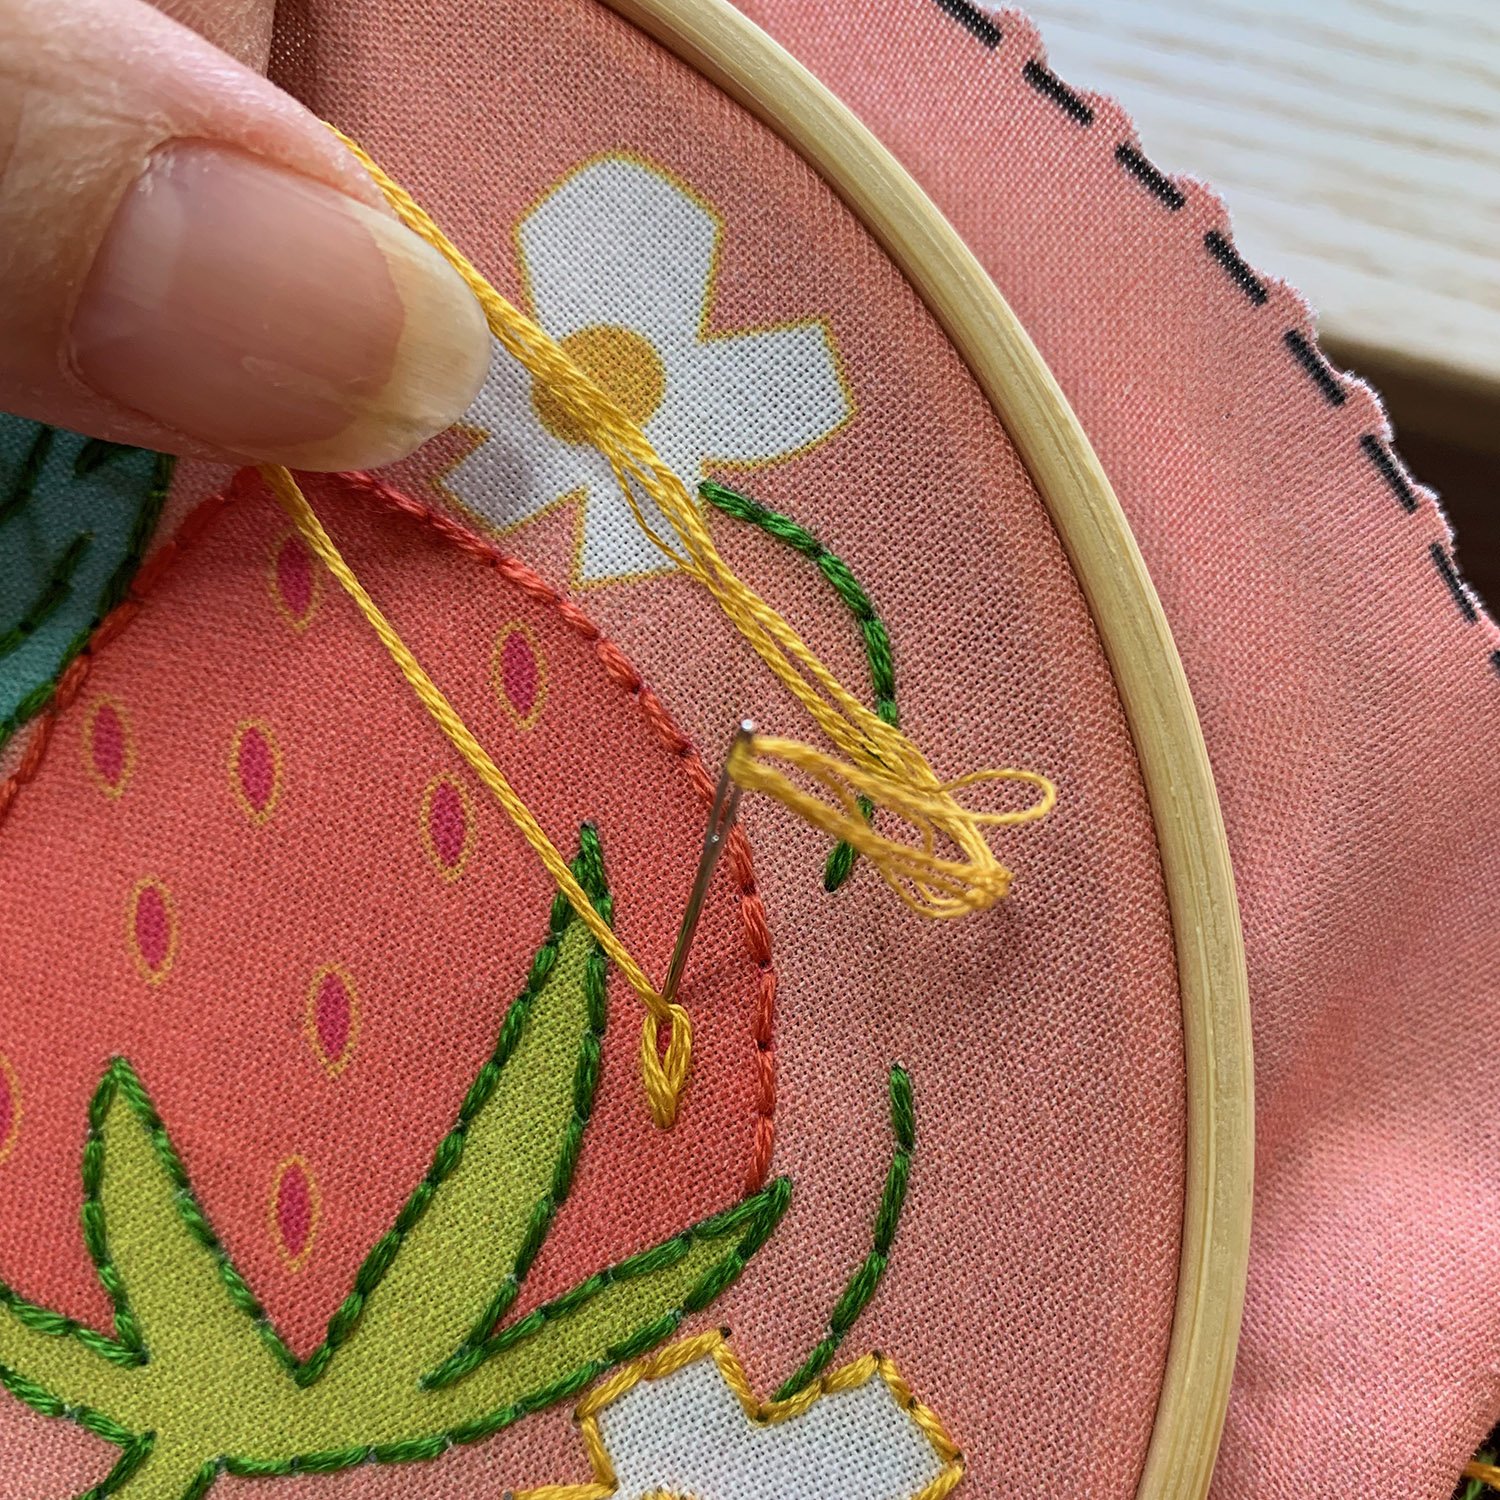 Strawberry embroidery detail 3.jpg